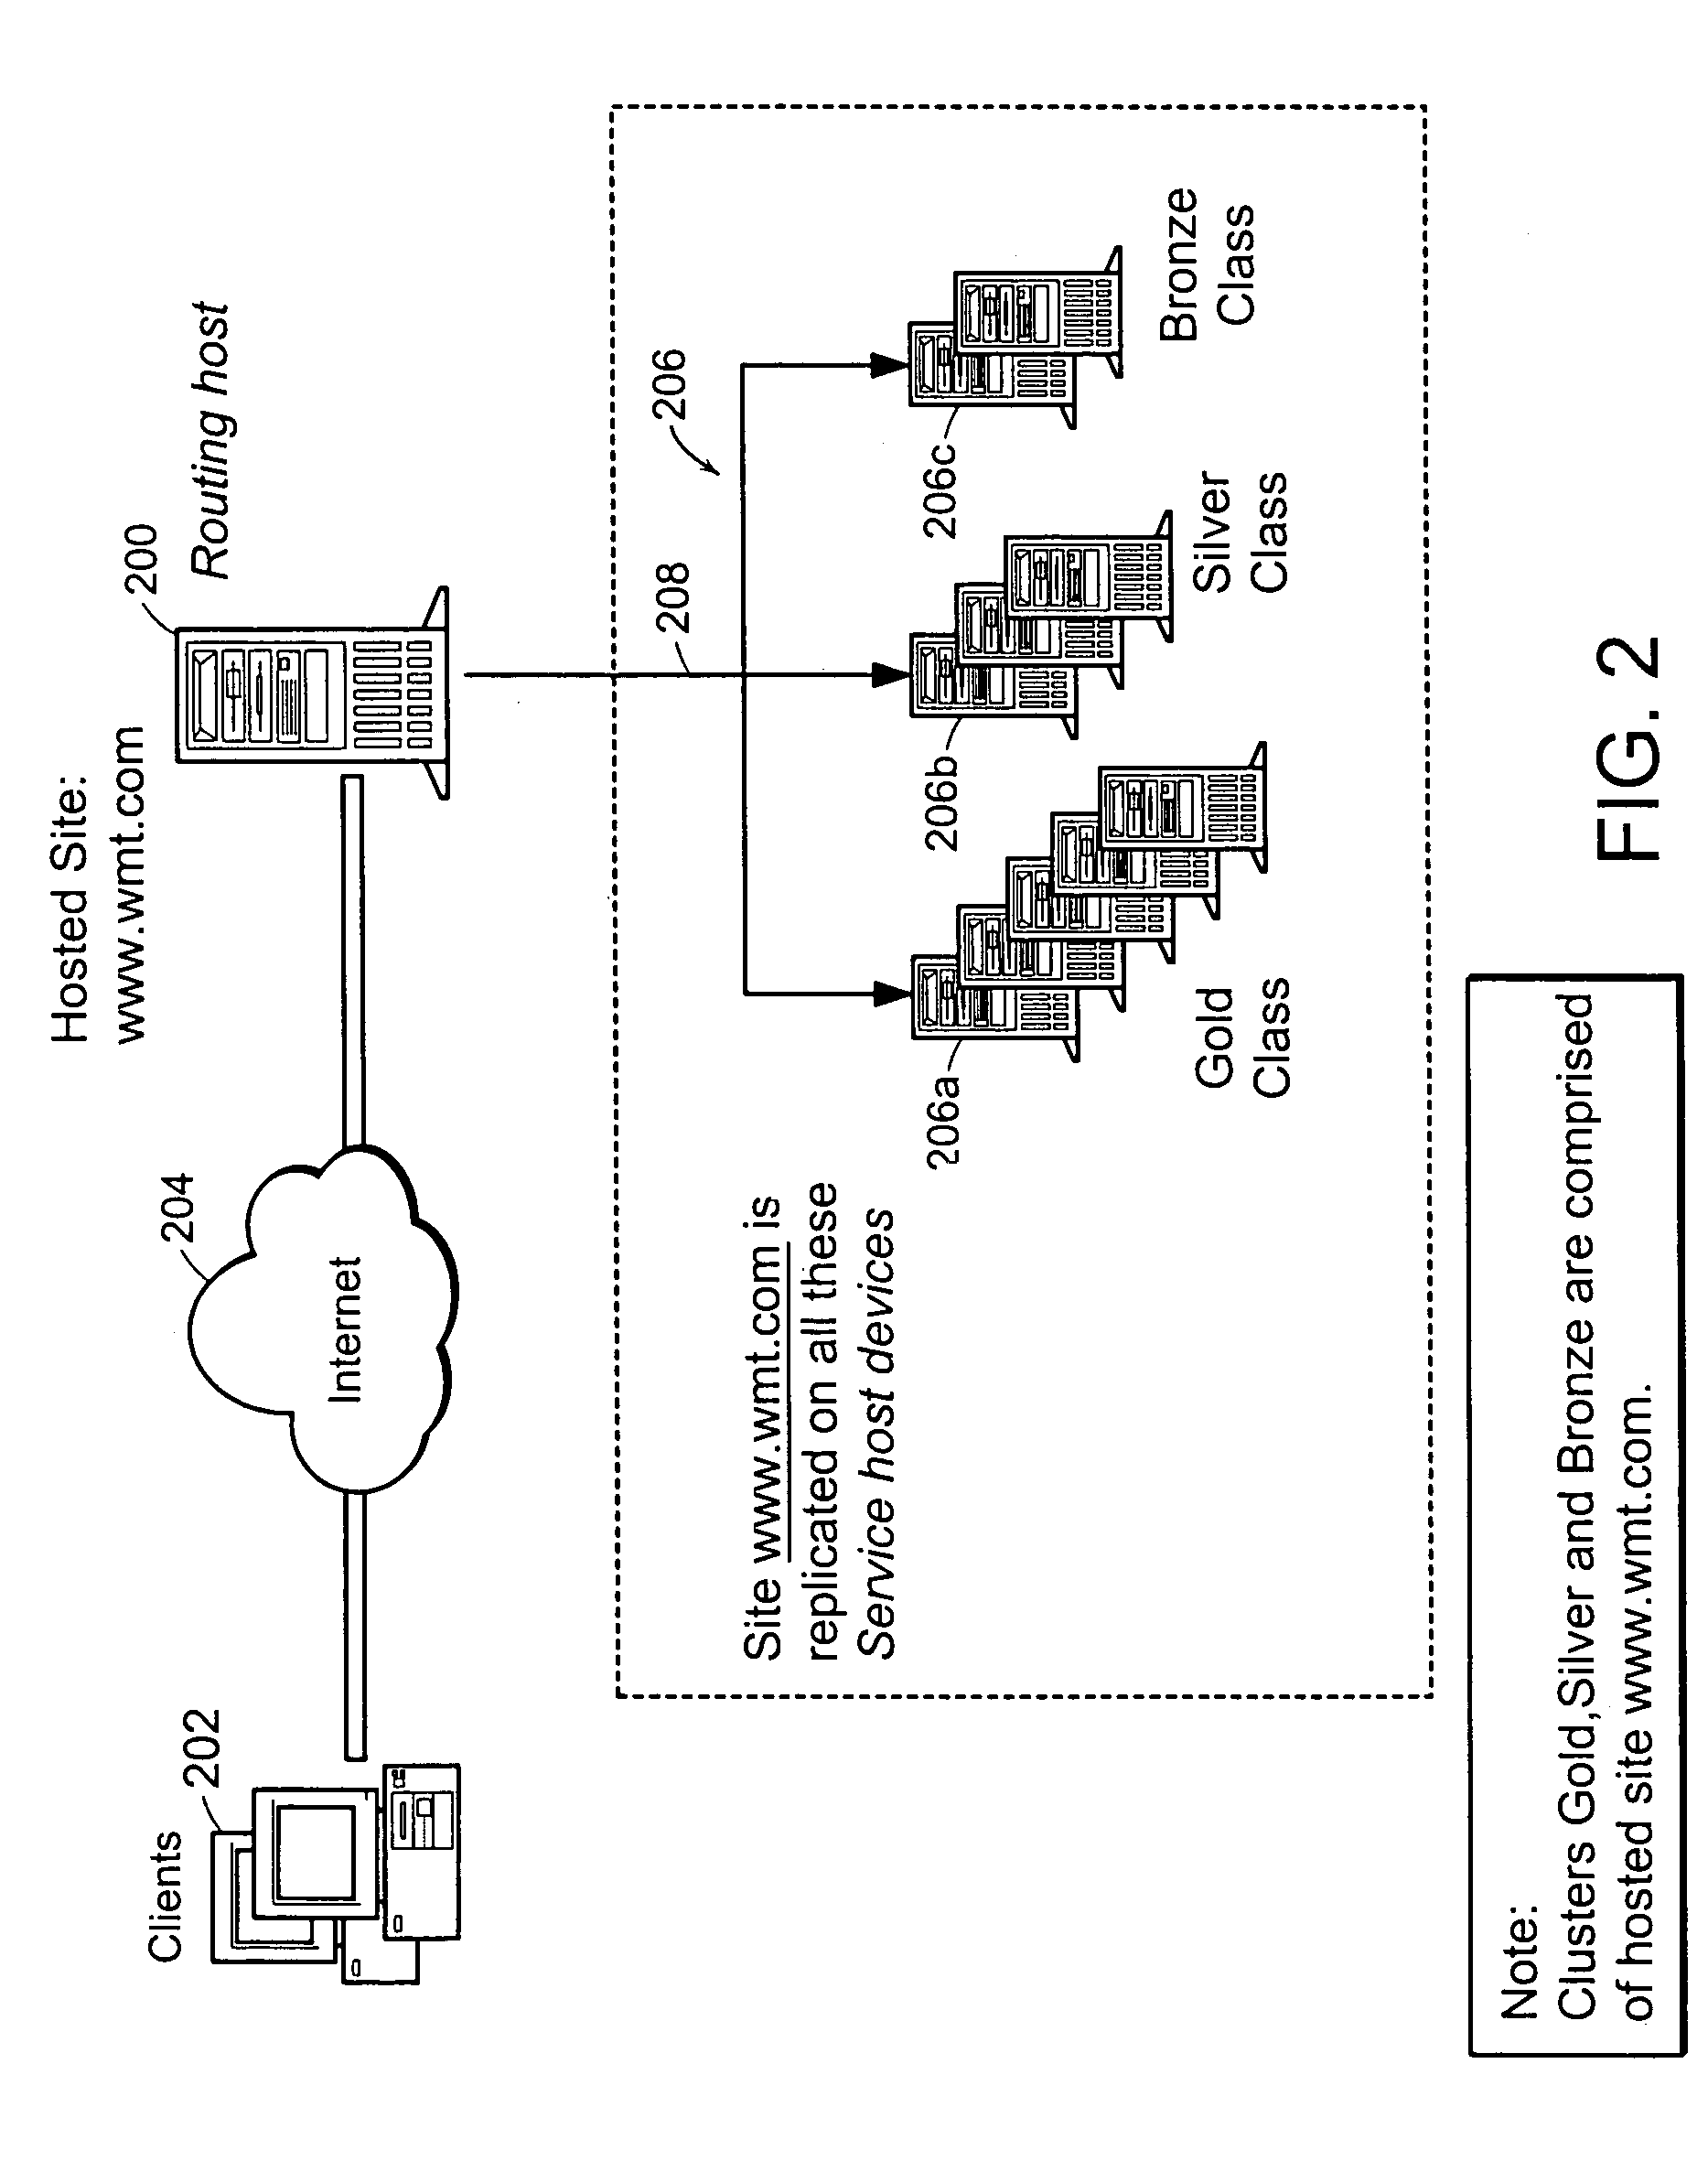 Method and apparatus for policy based class service and adaptive service level management within the context of an internet and intranet